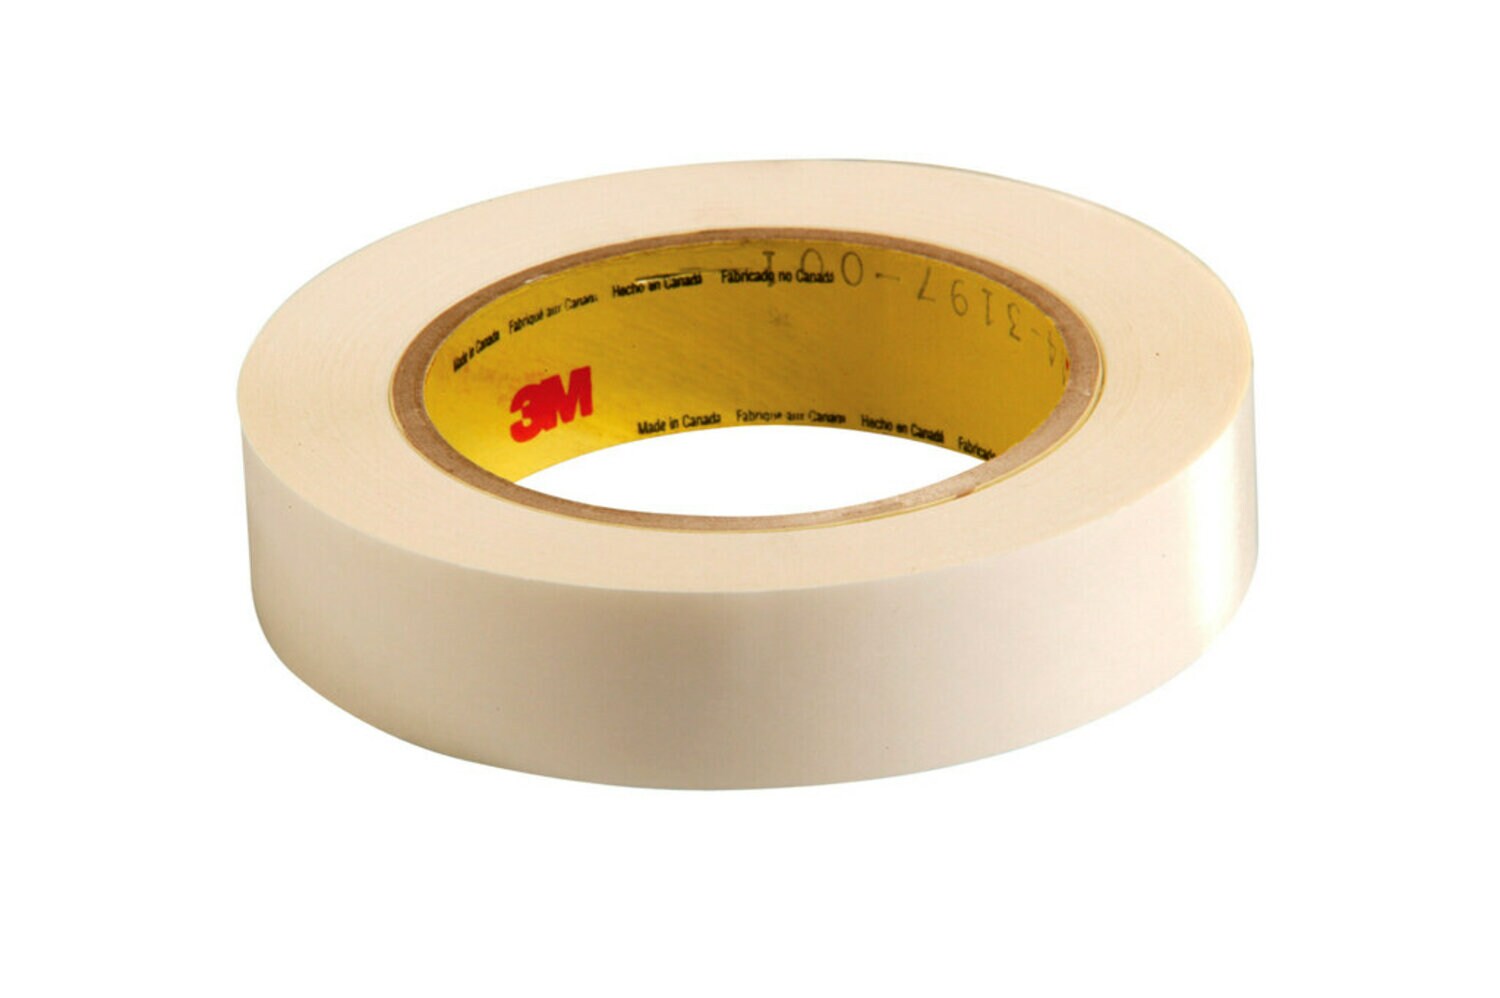 7010373267 - 3M Double Coated Tape 444, Clear, 1 1/2 in x 36 yd, 3.9 mil, 24 Roll/Case